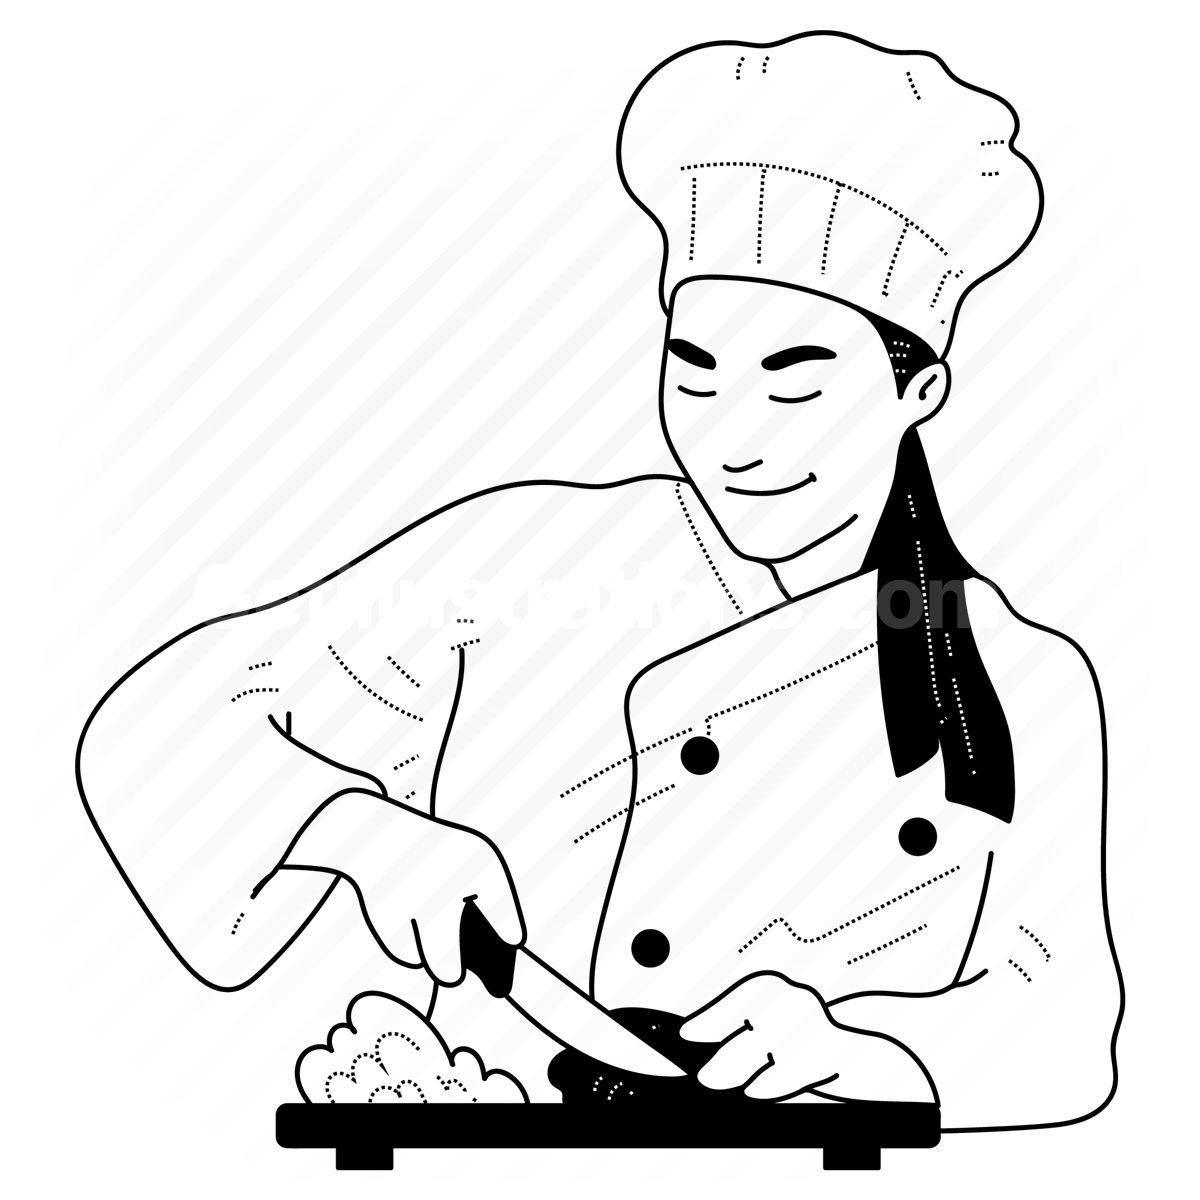 chef, cook, cooking, kitchen, restaurant, gastronomy, woman